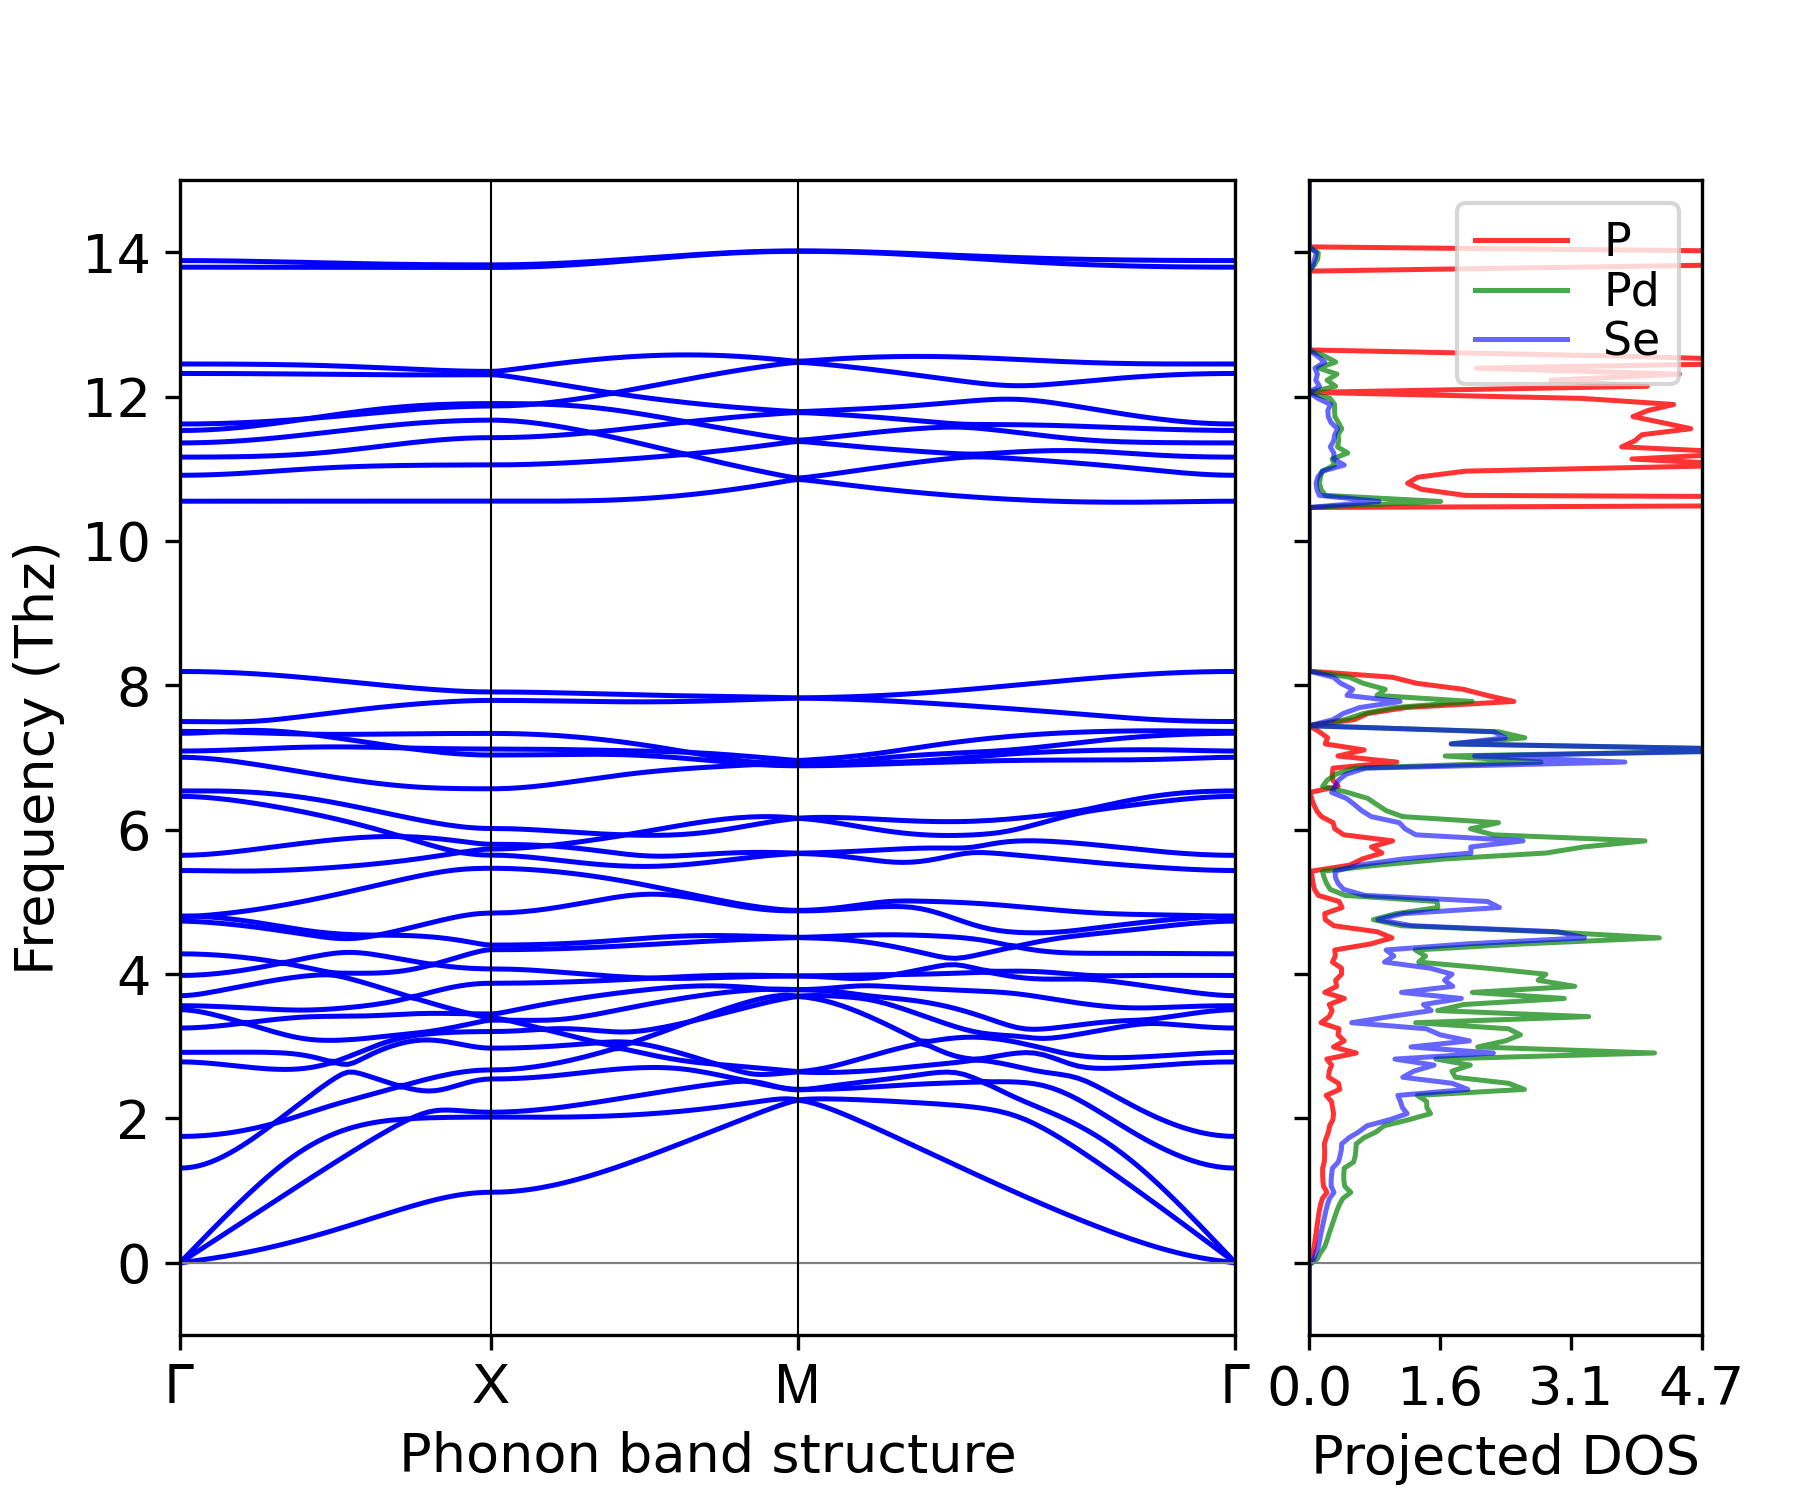 ../_images/phonon_BAND_LDOS-PPdSe_P2^c.png